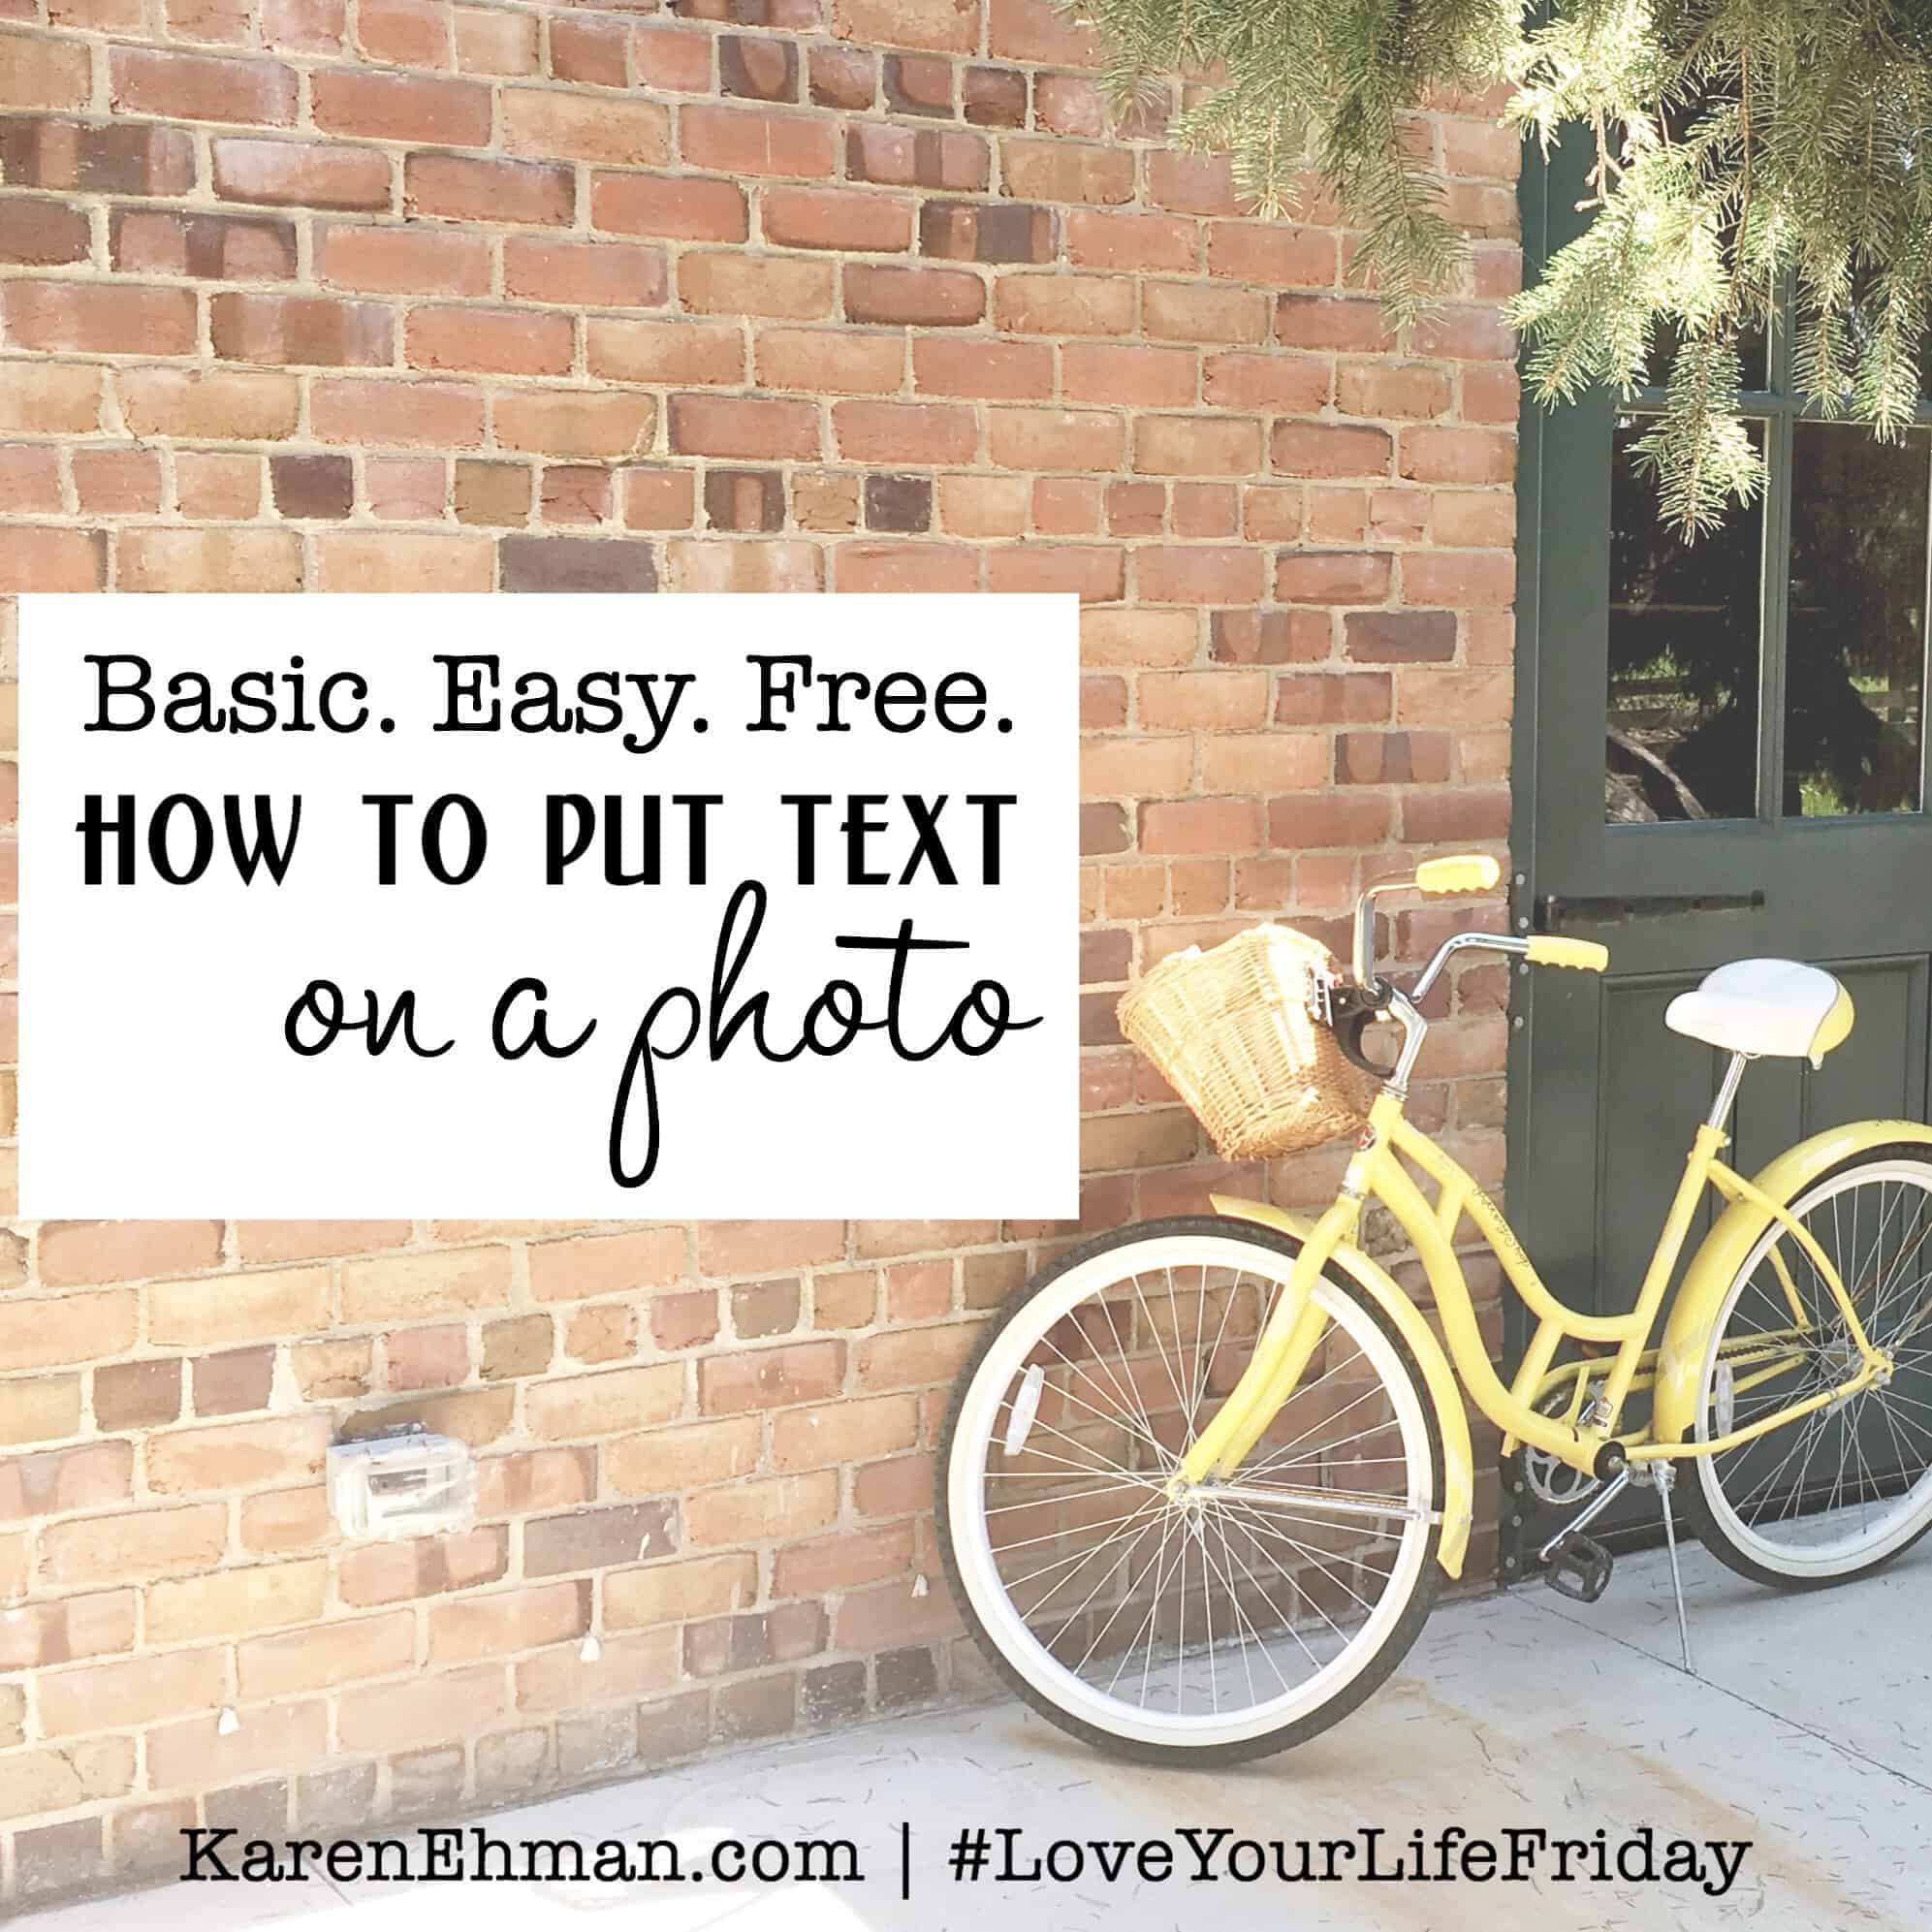 Basic, Easy, Free – How to Put Text on a Photo From Your Phone for #LoveYourLifeFriday